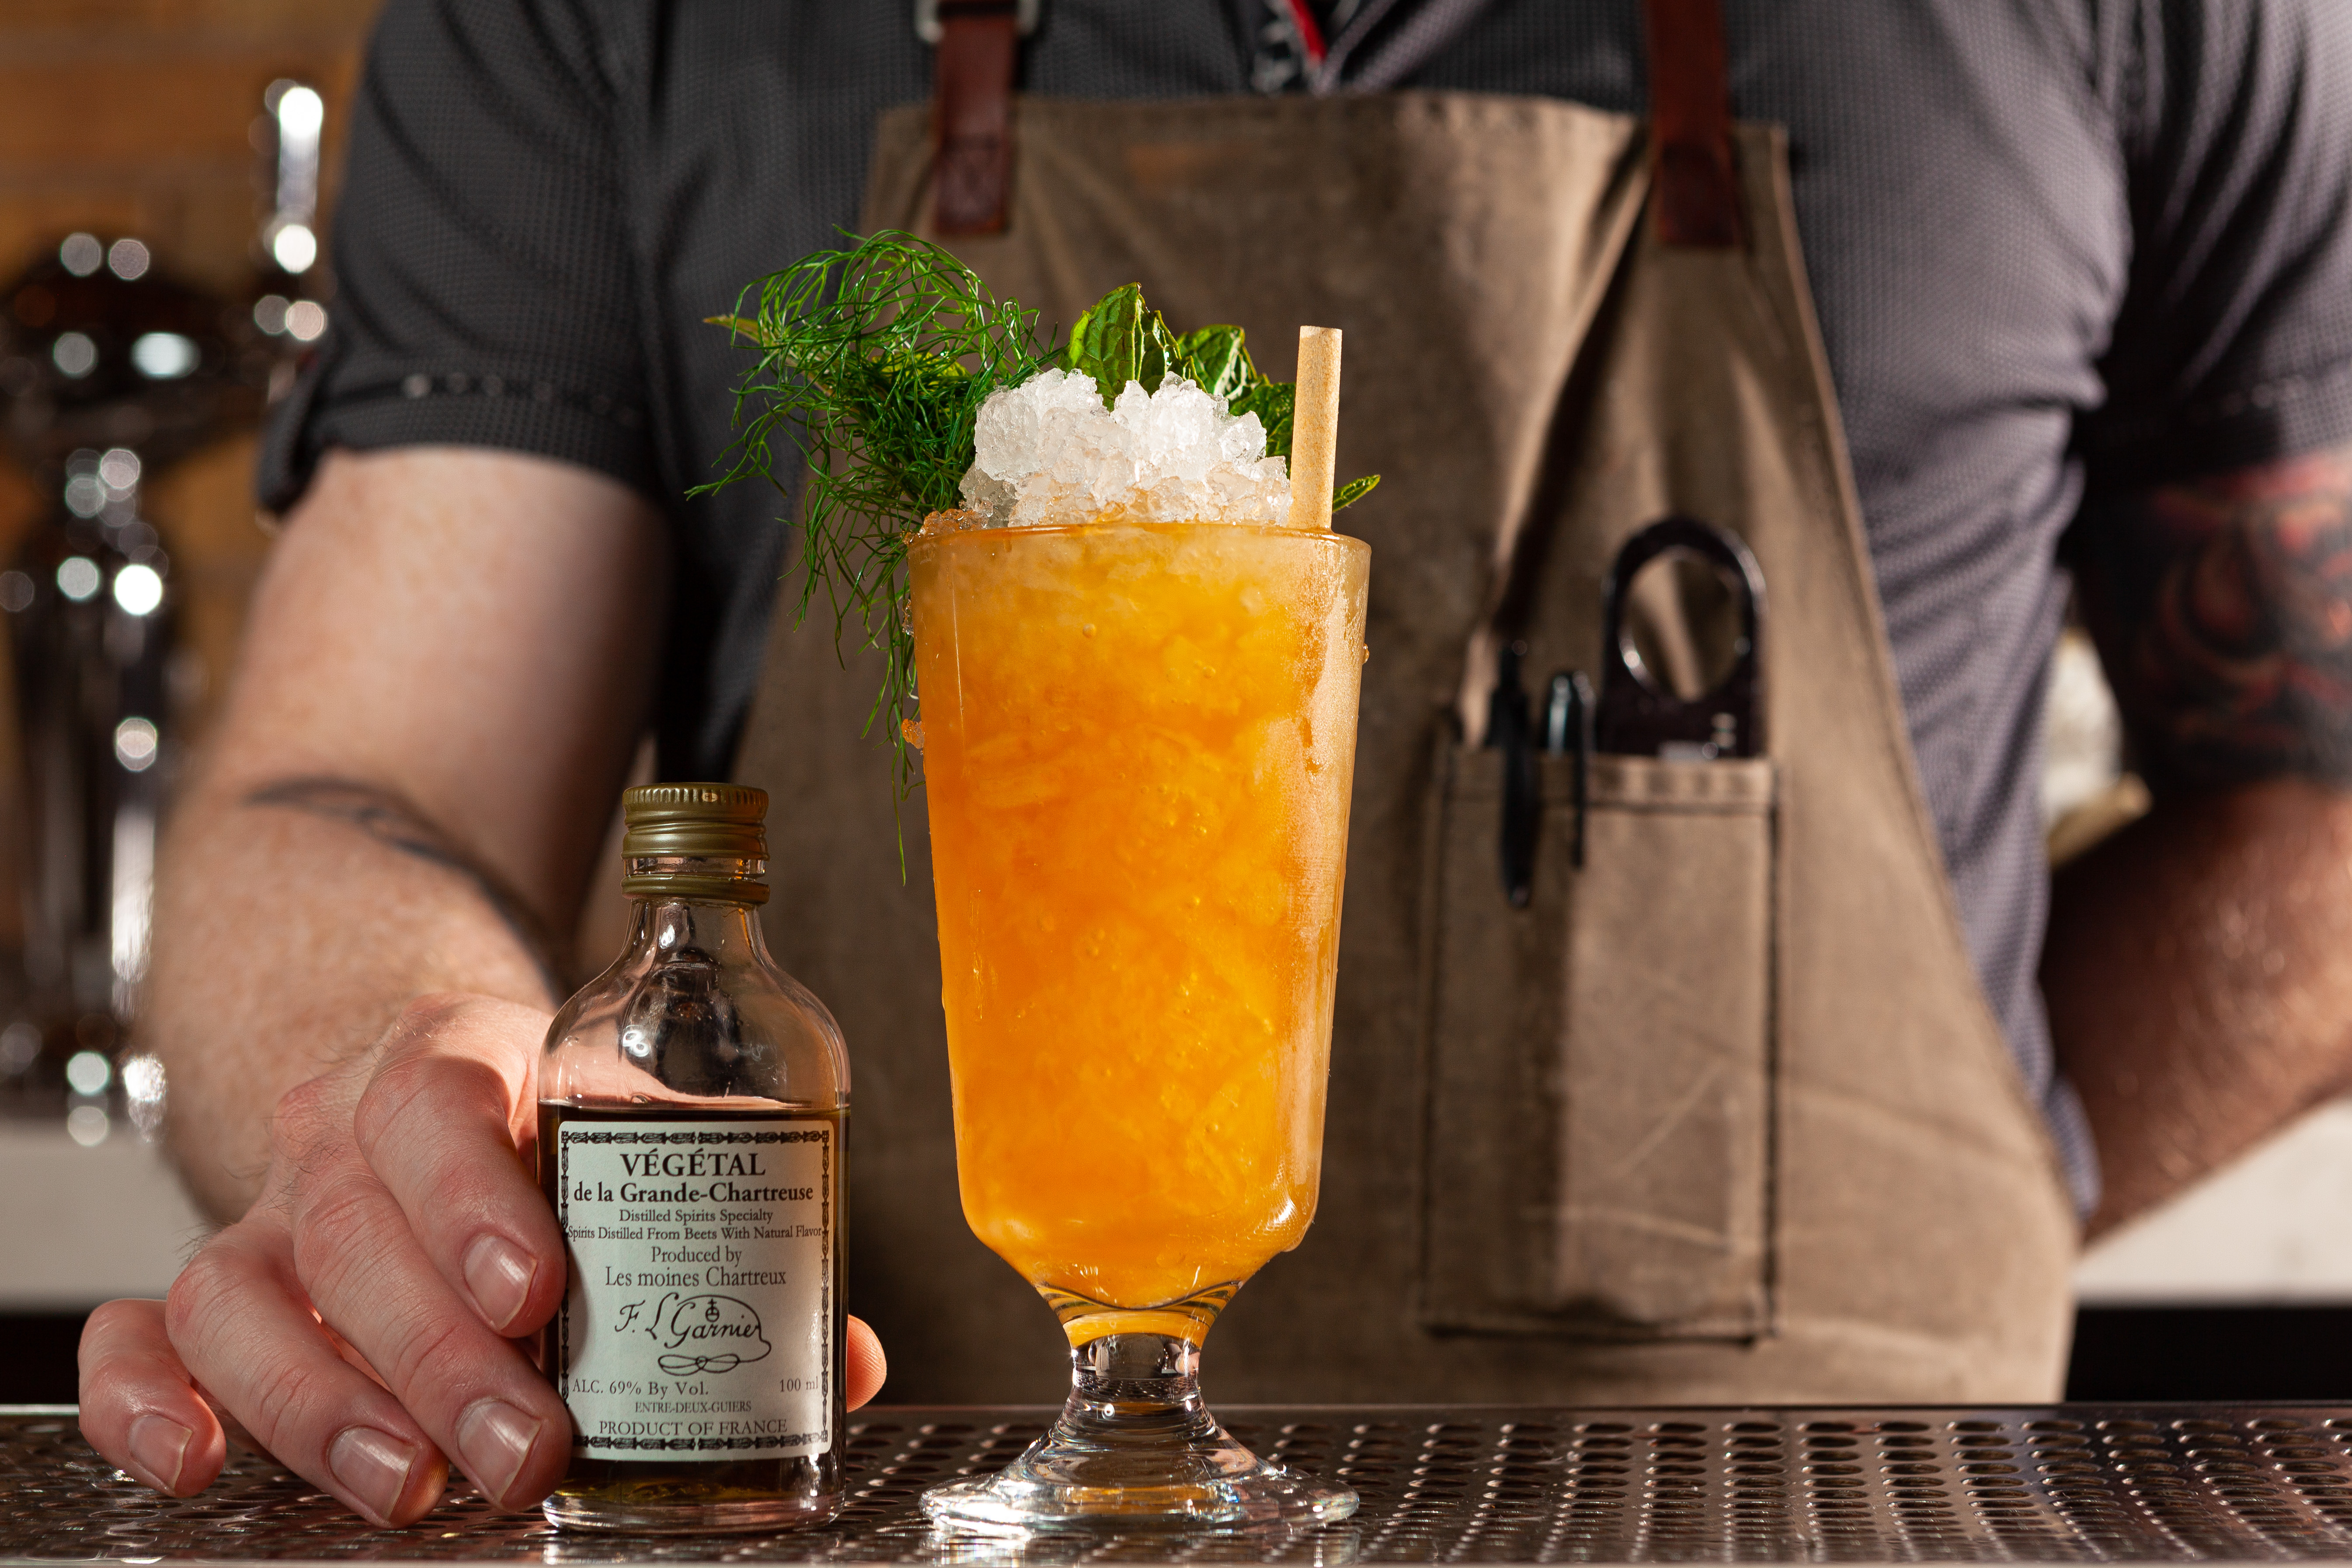 A bartender stands behind an orange cocktail in a tall glass.